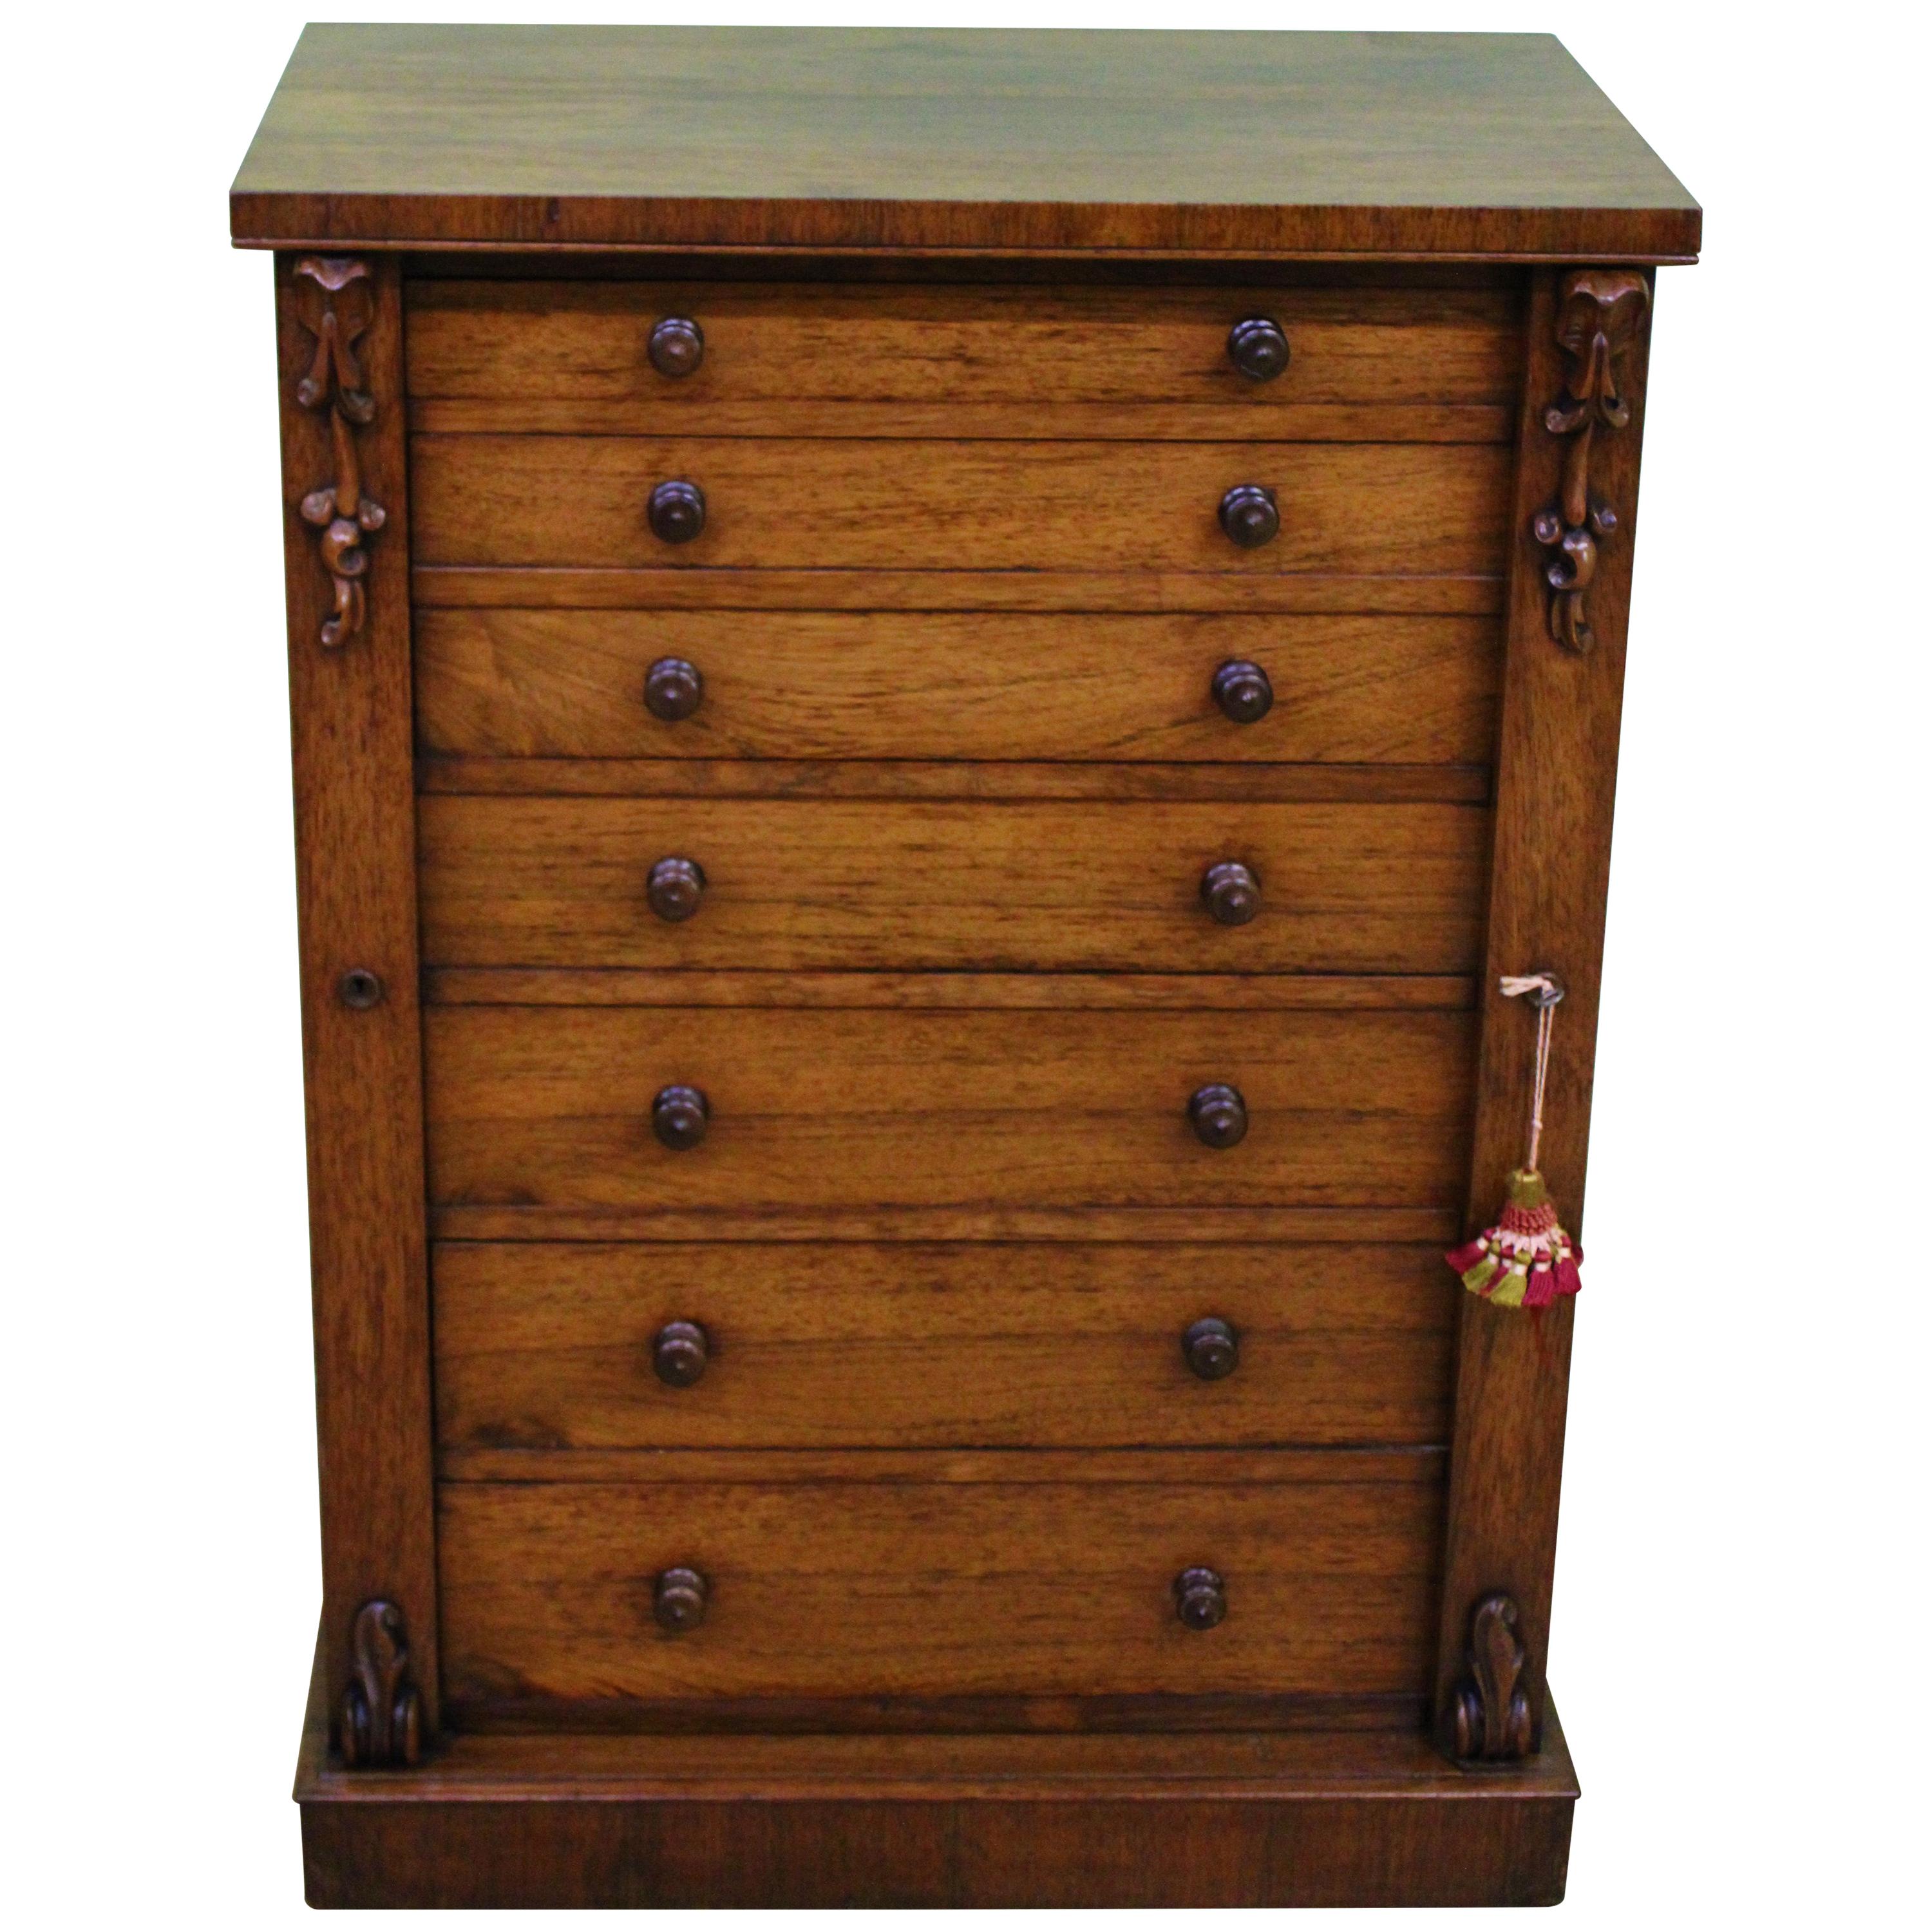 English Victorian Rosewood Secrétaire Wellington Chest of Drawers